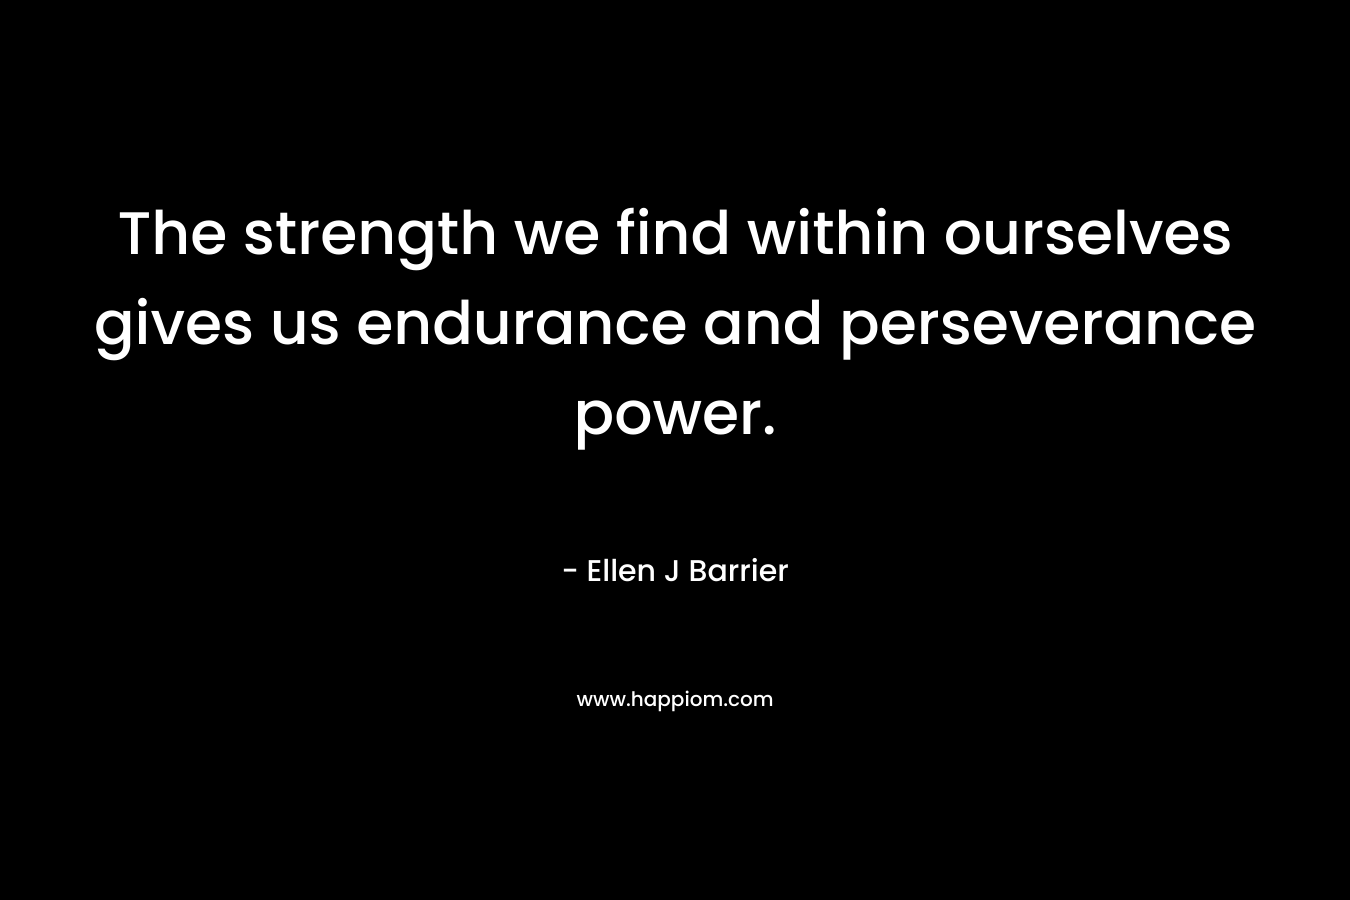 The strength we find within ourselves gives us endurance and perseverance power.